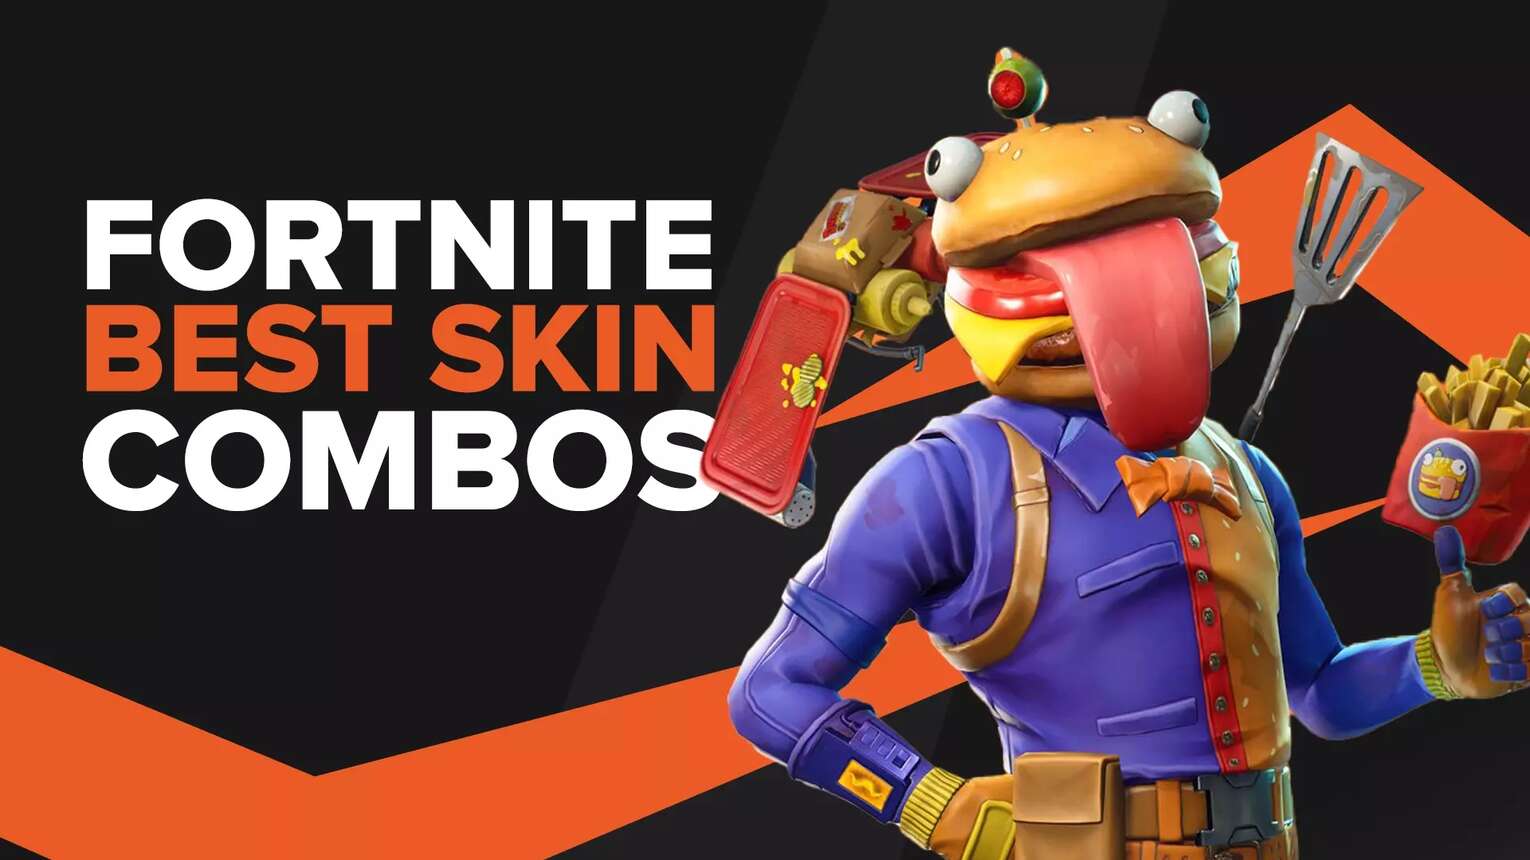 5 Absolute Best Fortnite Skin Combos That You Have To Do